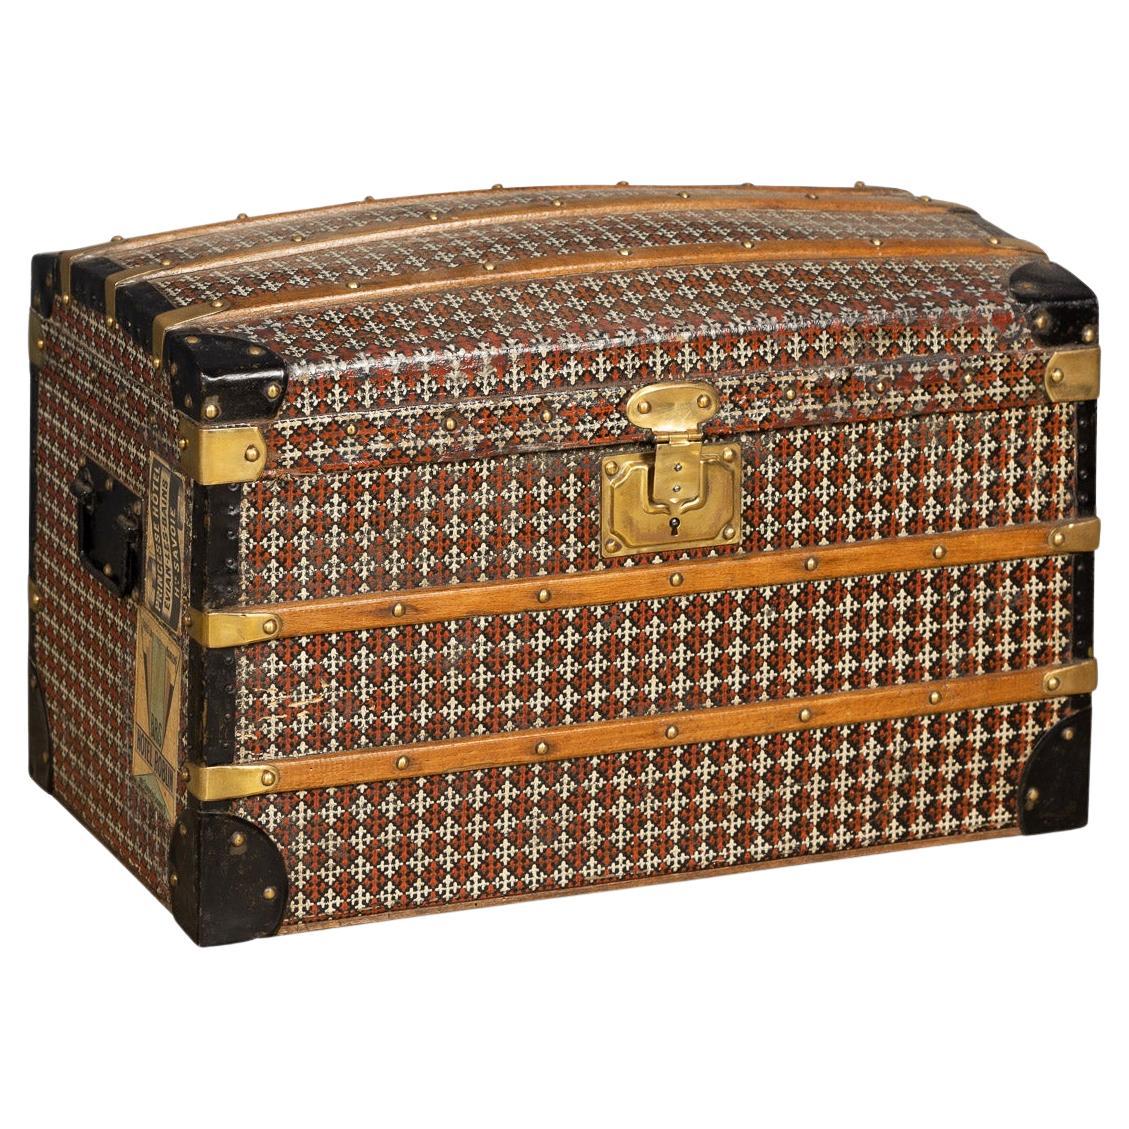 20th Century Childs Traveling Trunk, c.1920